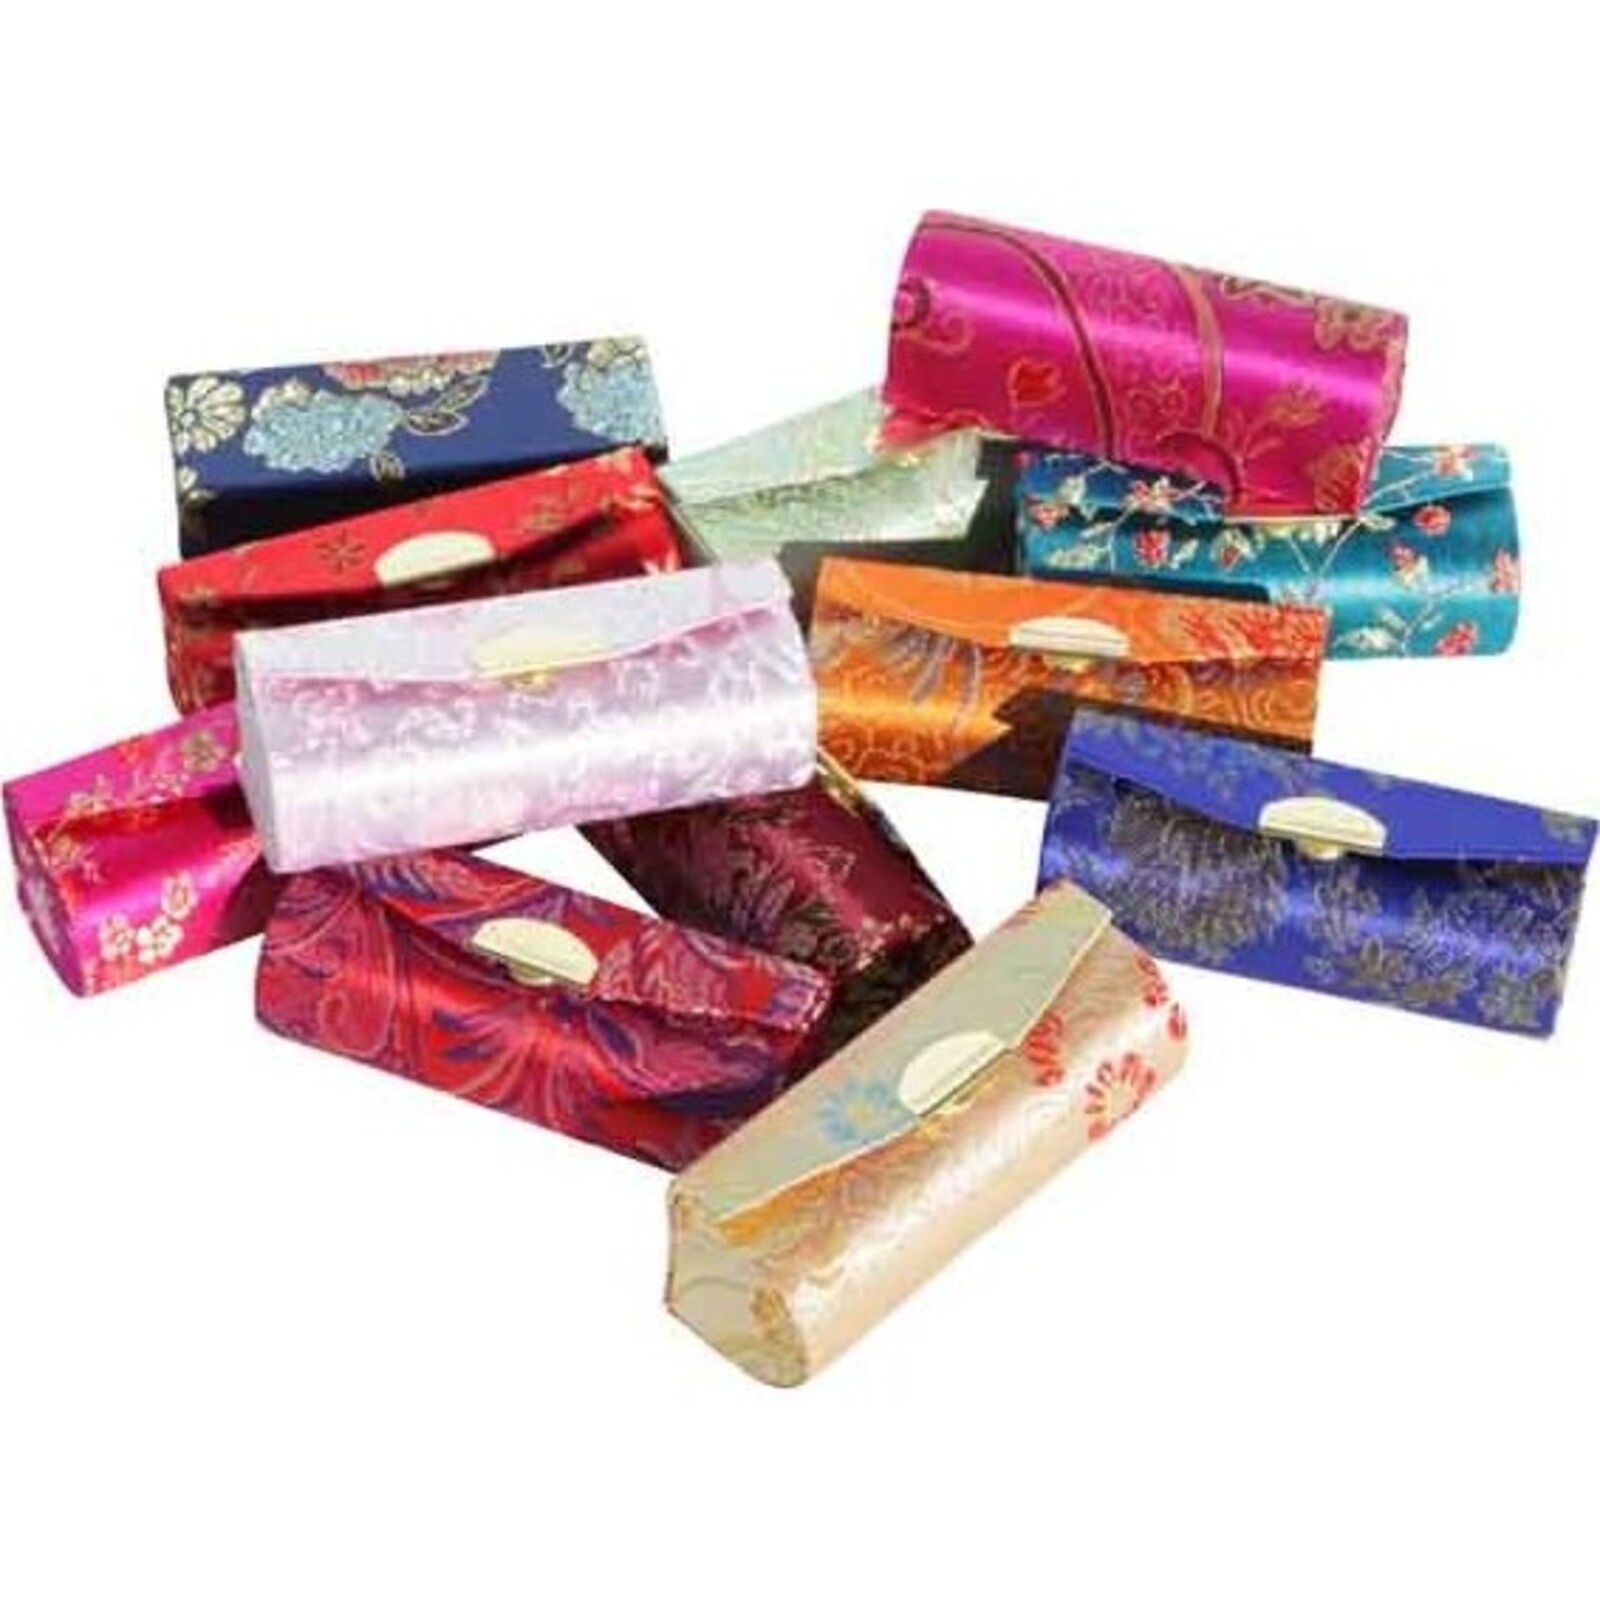 Lipstick Case - set 12 Assorted...Price is for set of 12